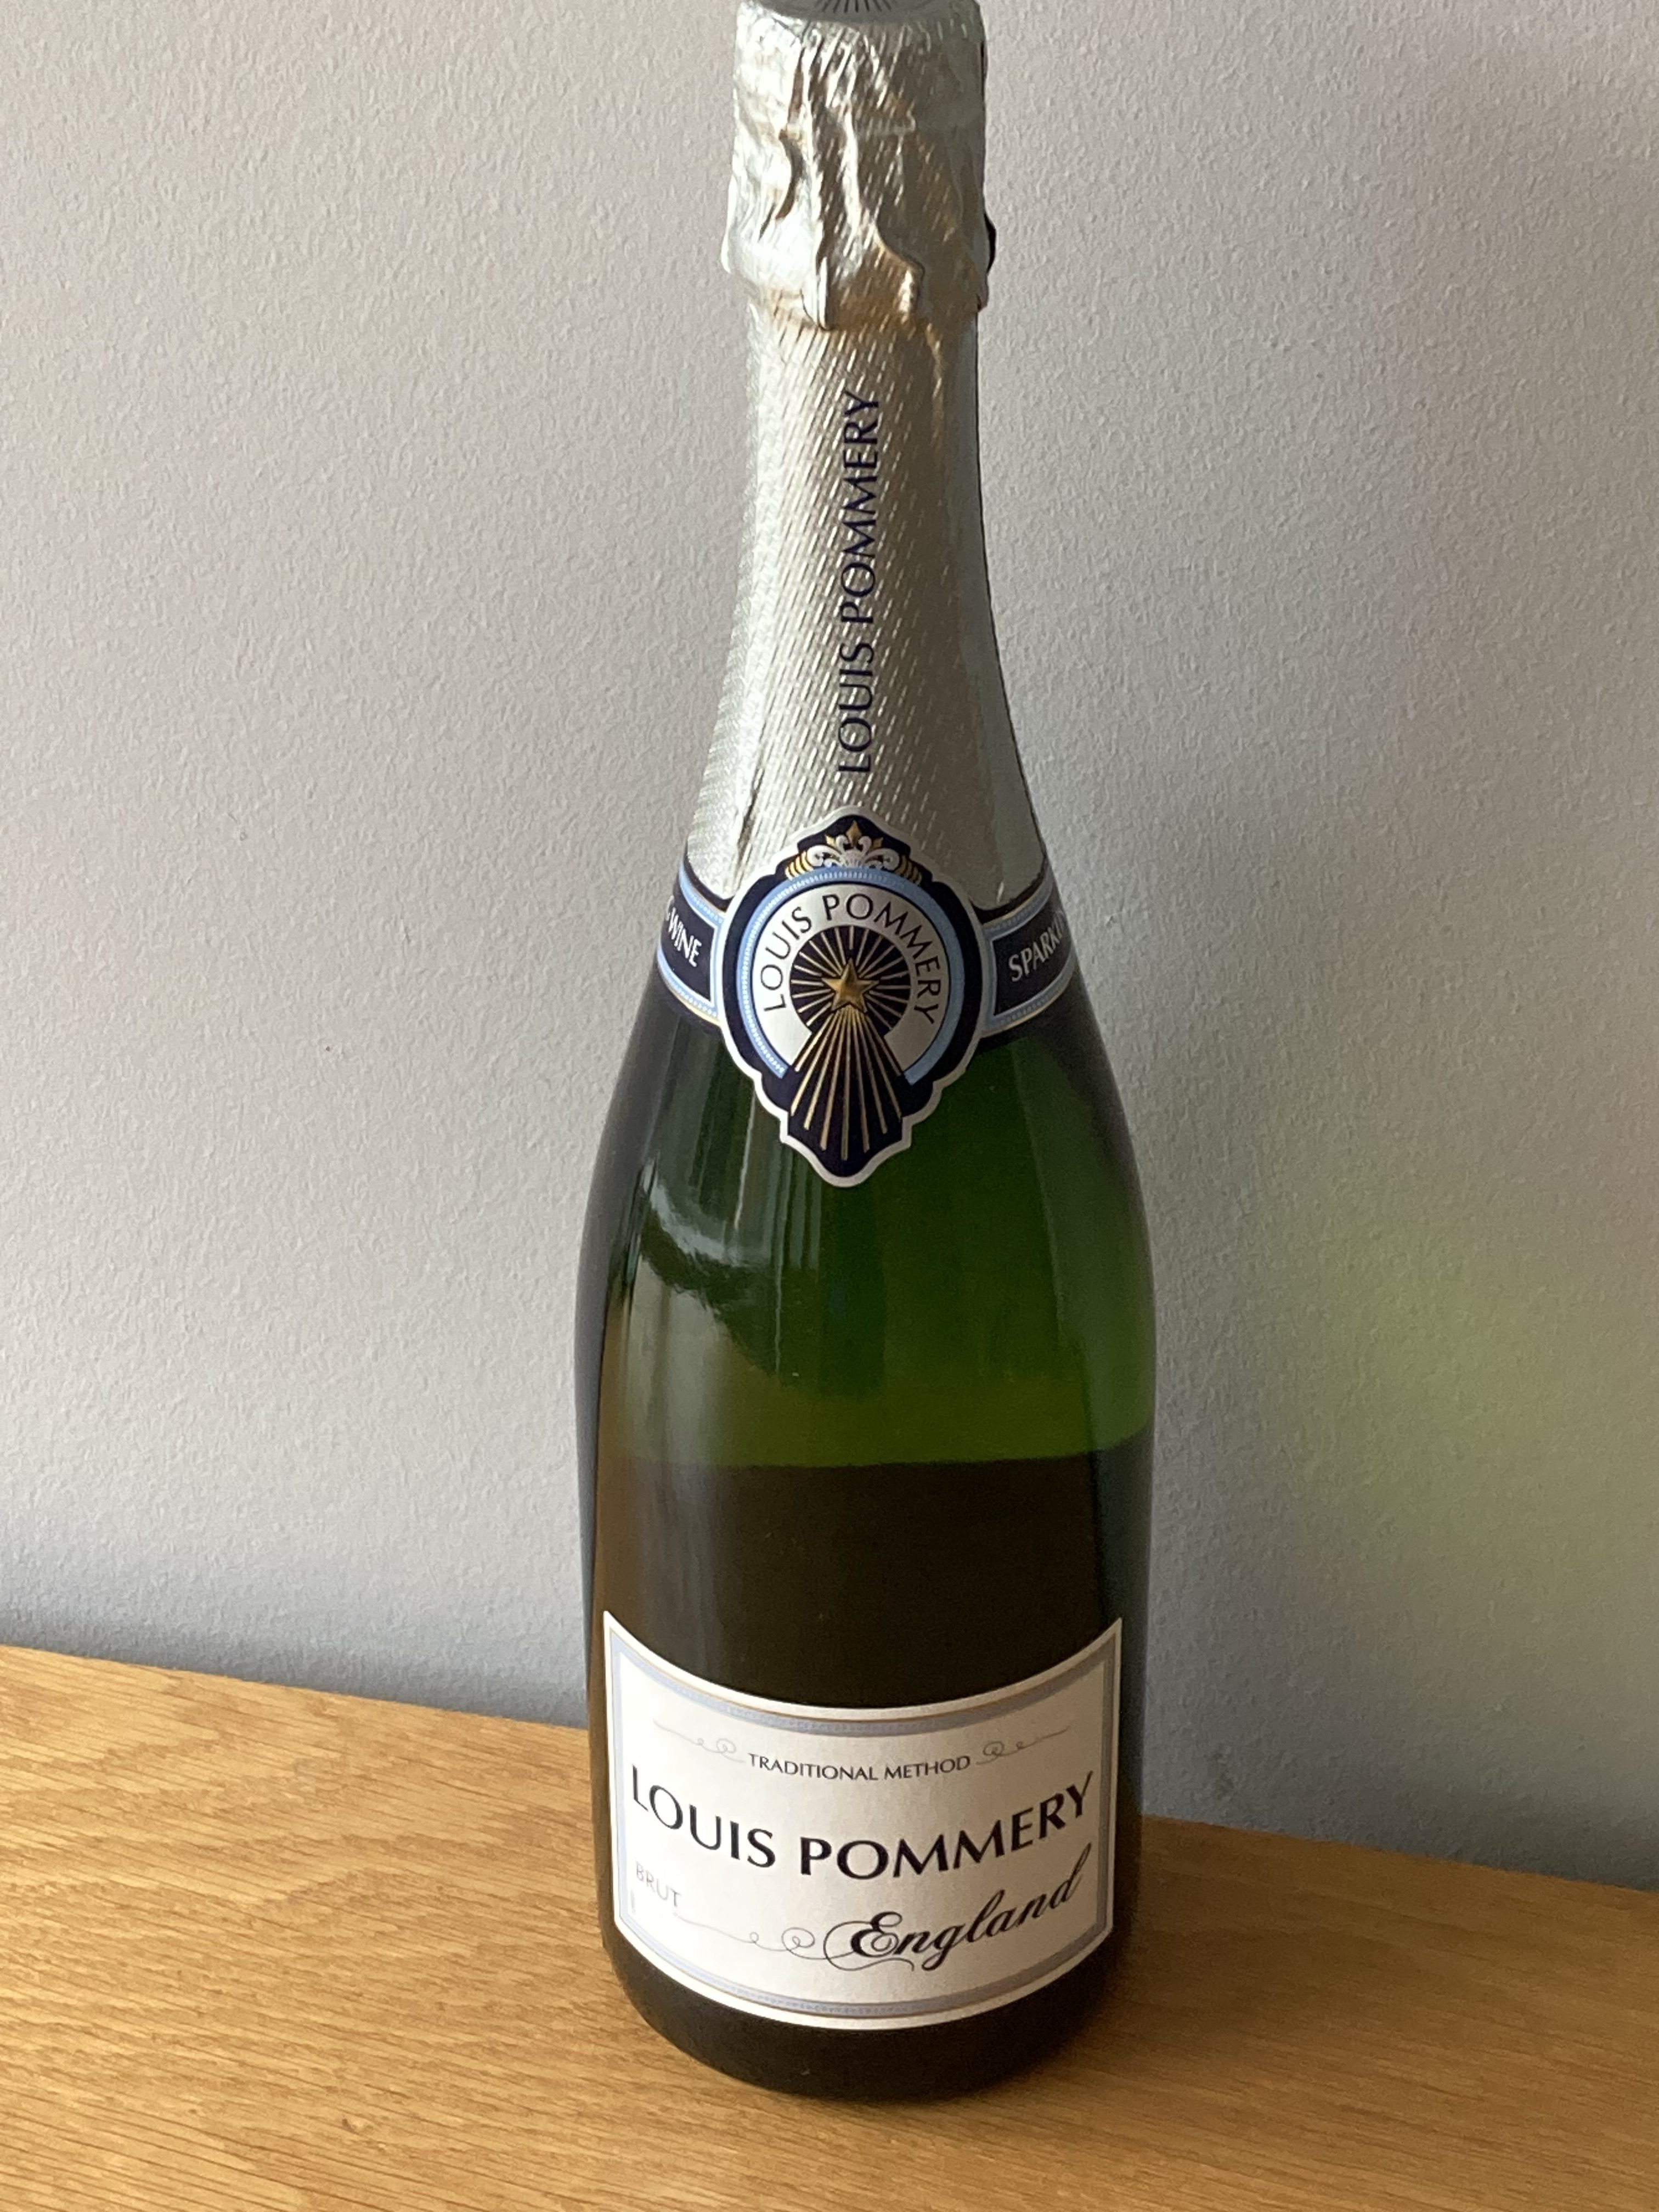 This sparkling wine is made in the UK by a French champagne house.